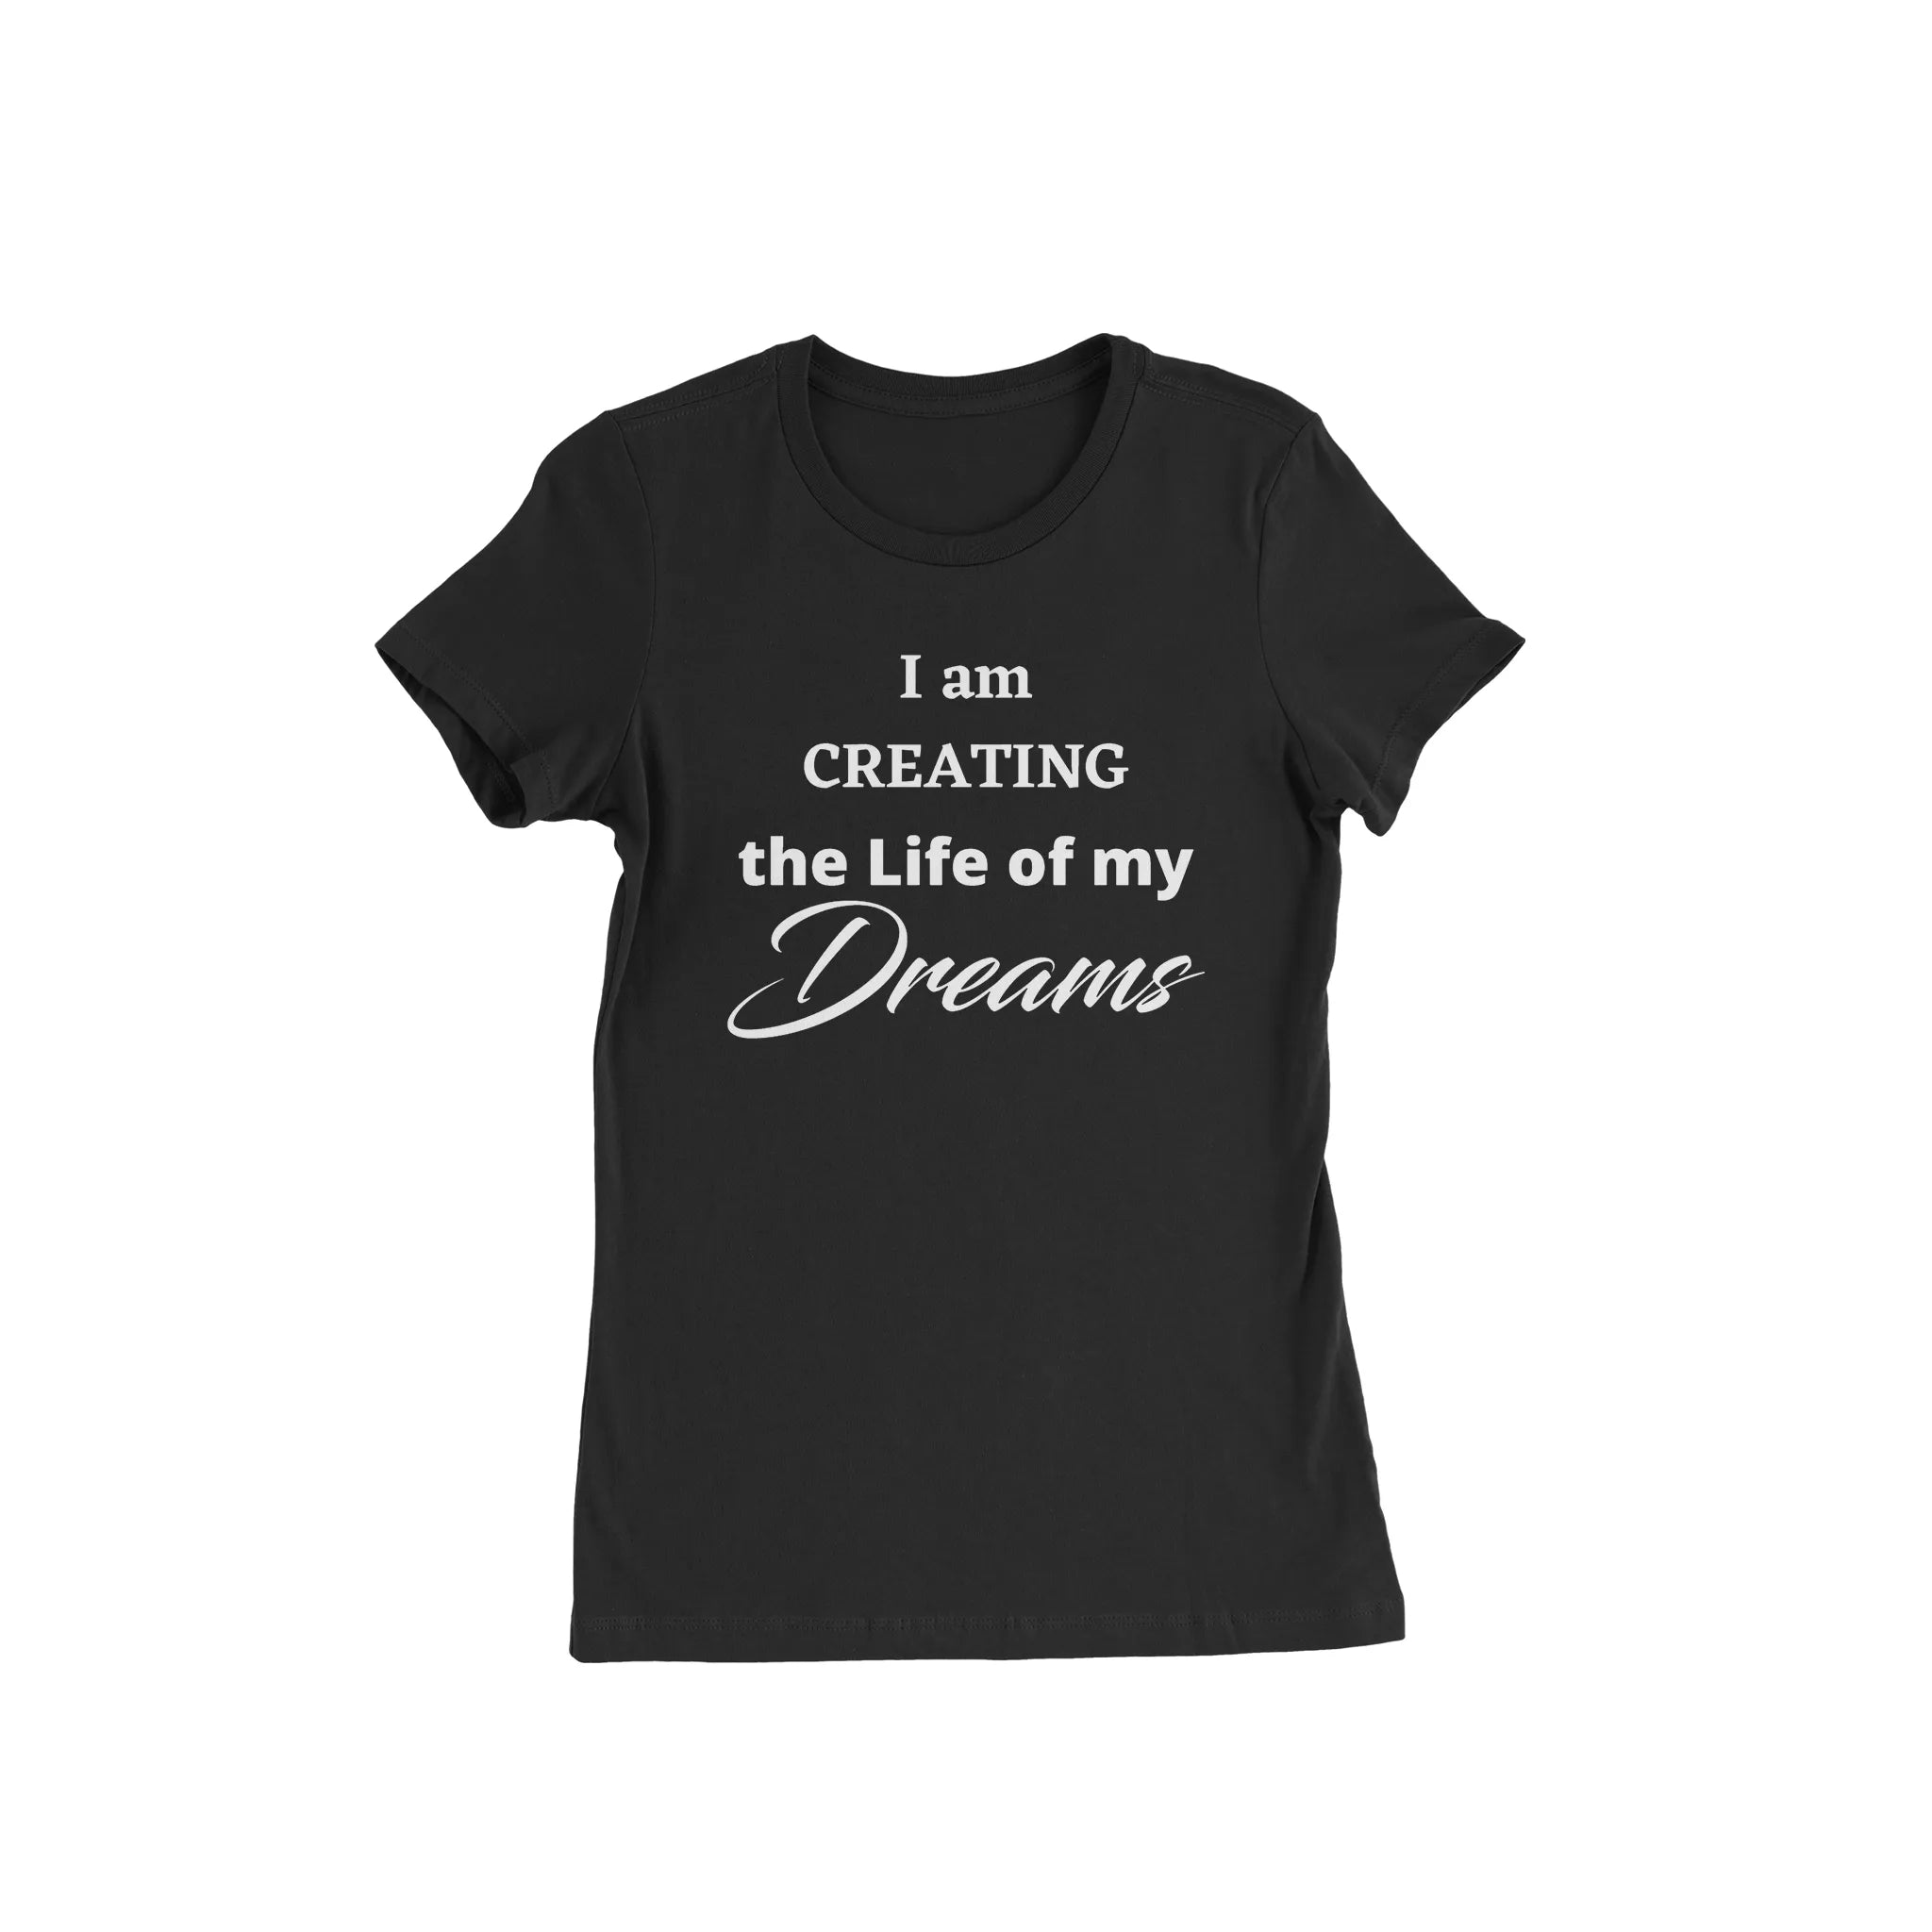 I am creating the Life of my Dreams Black T - Shirt - Diva Starr Boutique